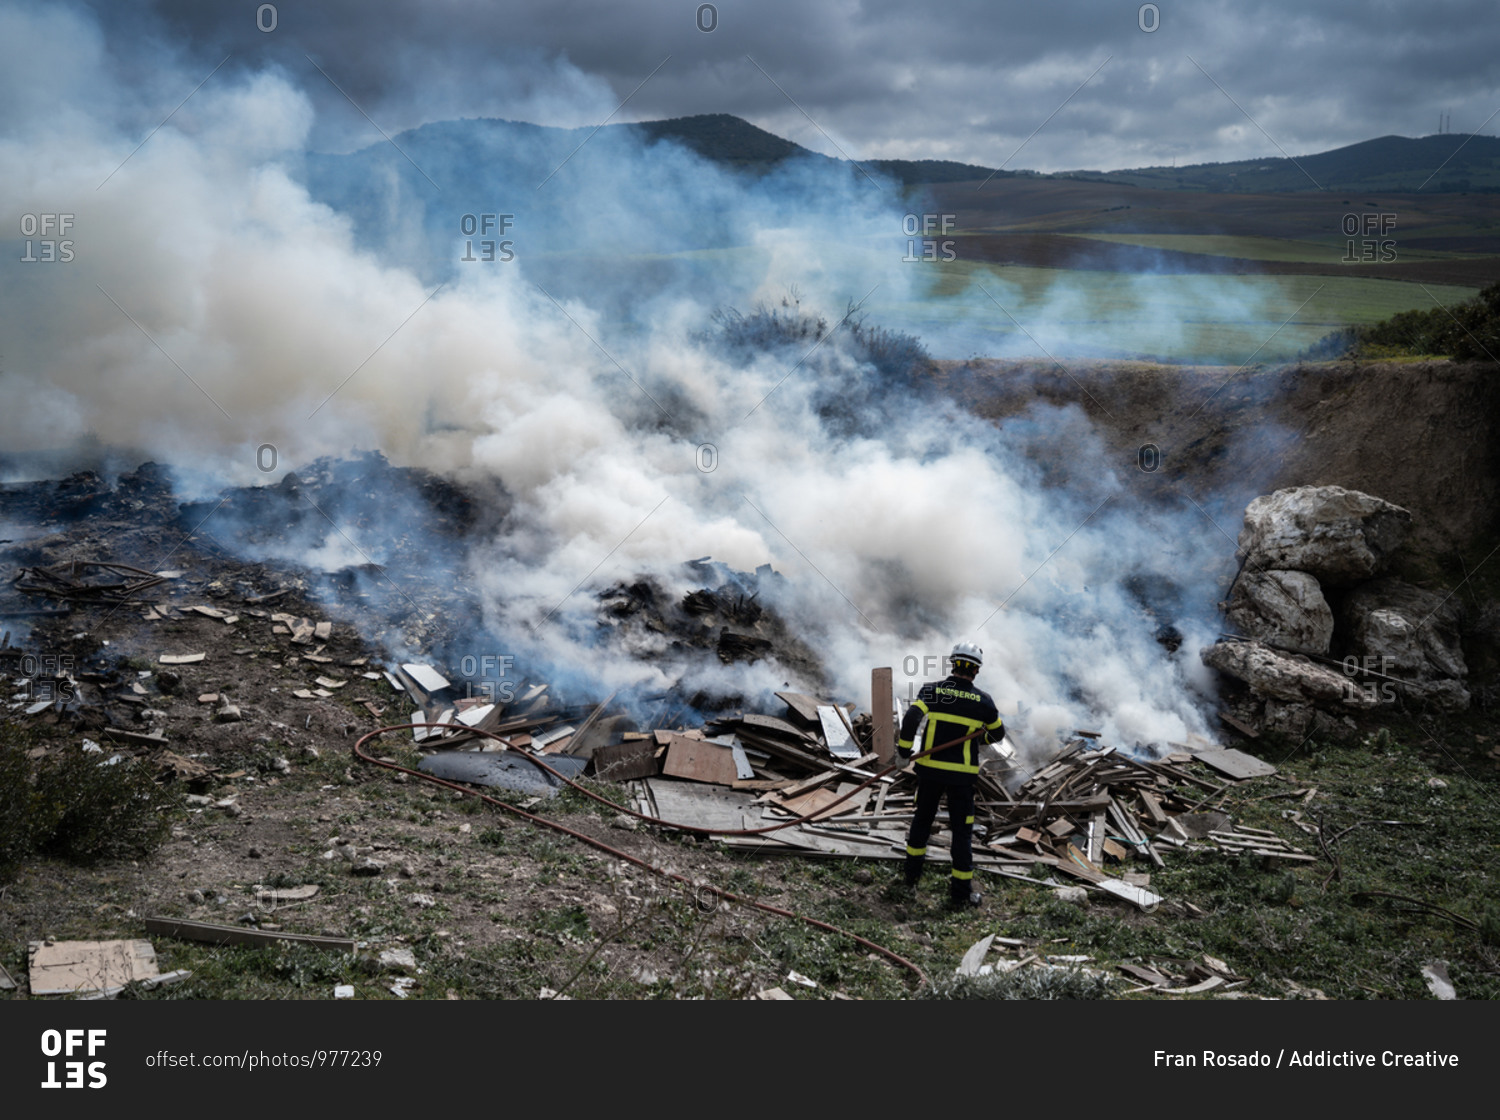 Back view of brave fireman in protective uniform standing with hose and extinguishing fire on dump in mountains